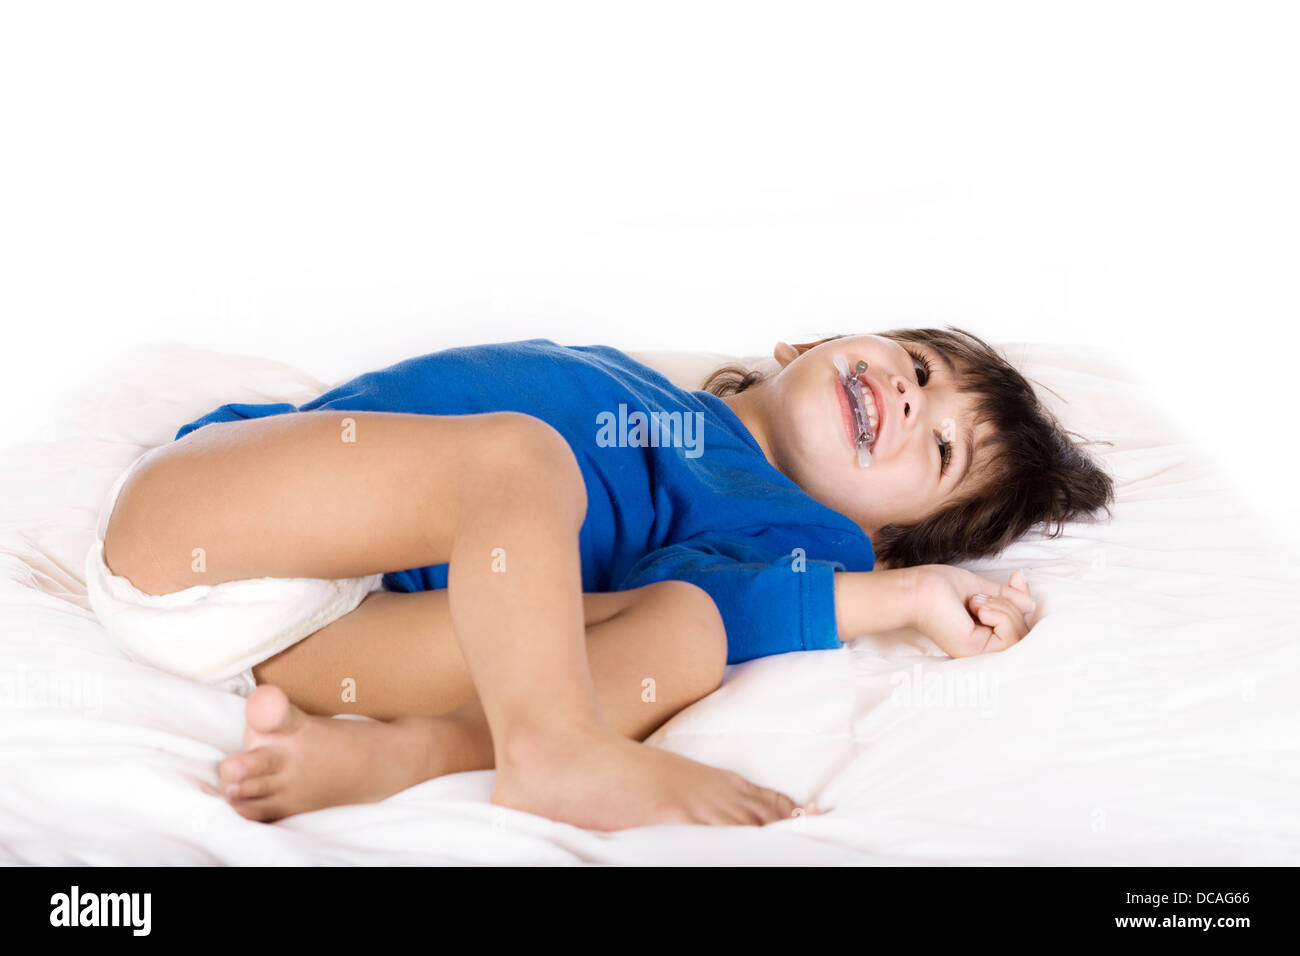 disabled toddler boy with cerebral palsy Stock Photo